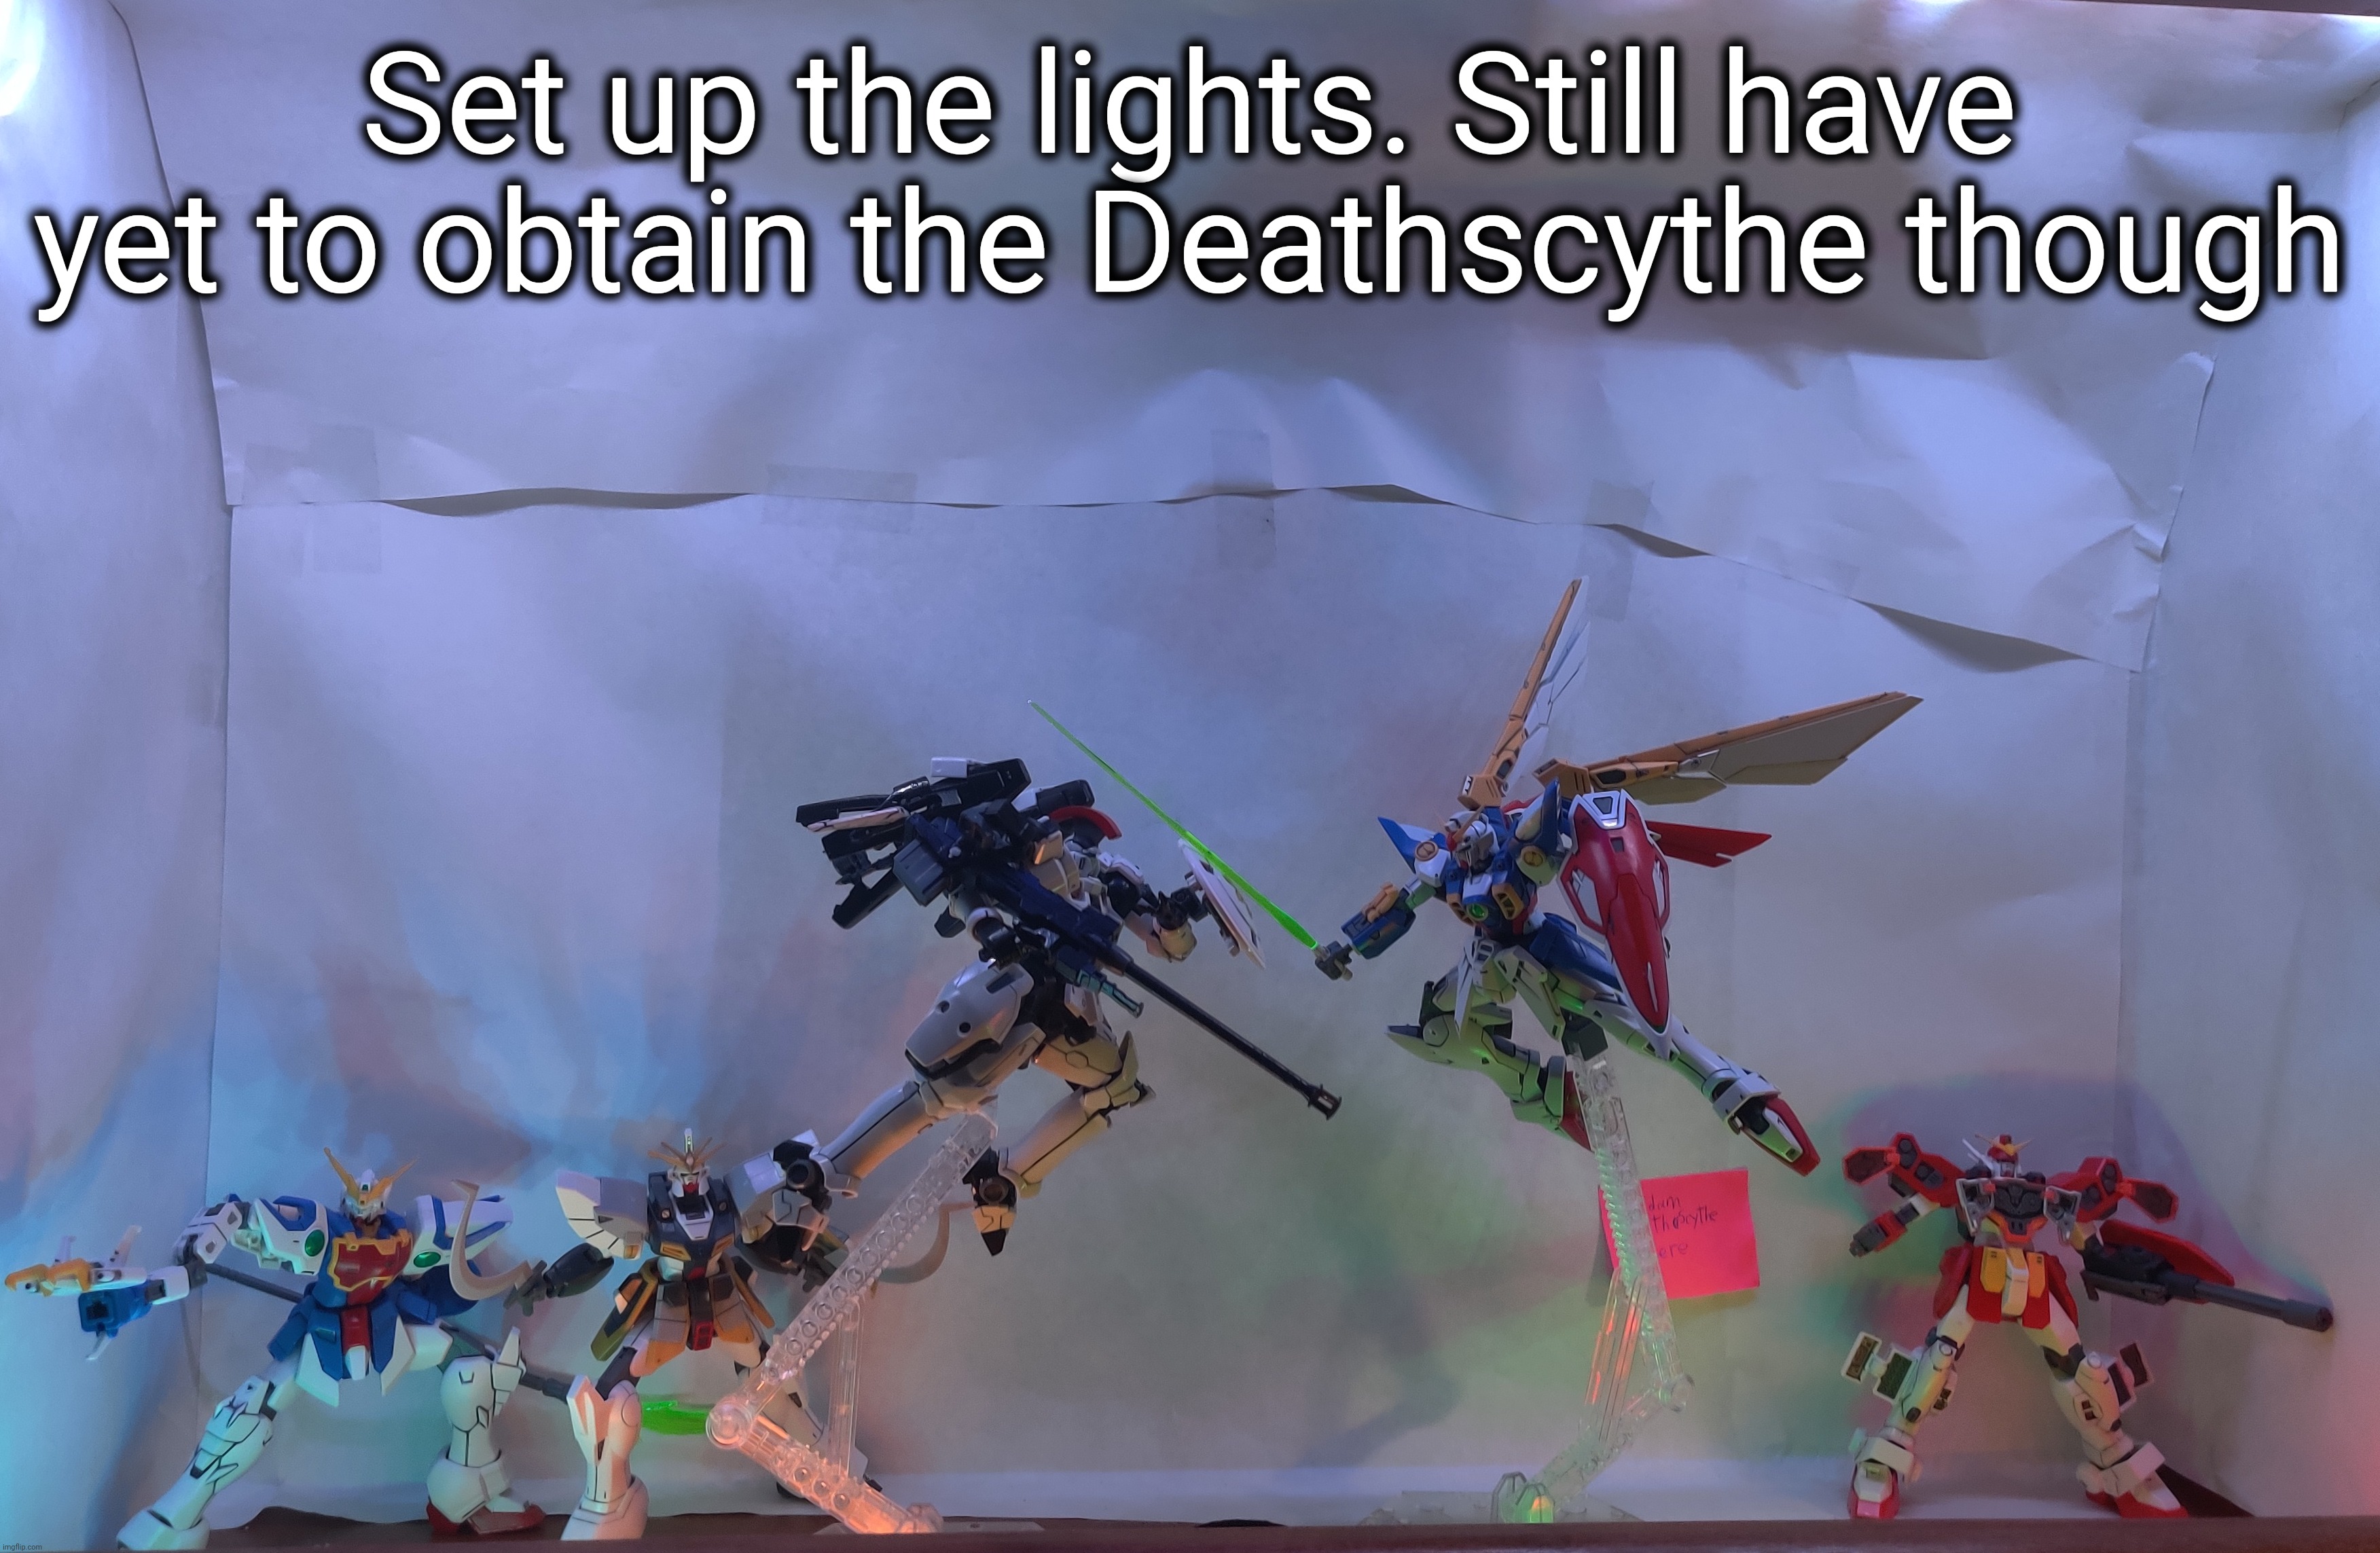 Set up the lights. Still have yet to obtain the Deathscythe though | made w/ Imgflip meme maker